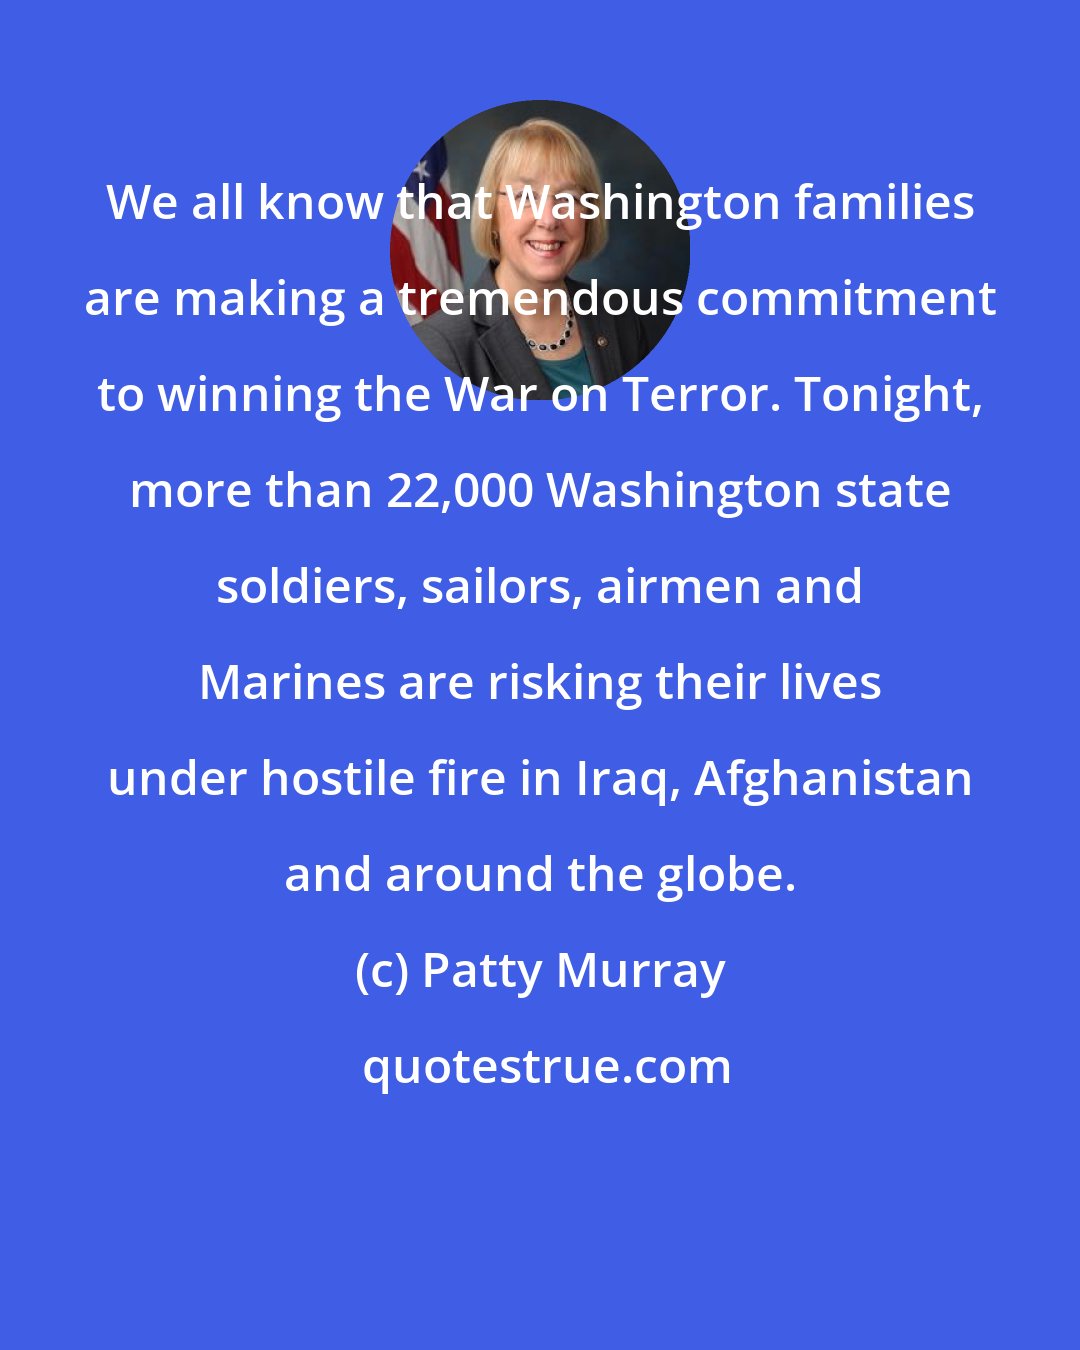 Patty Murray: We all know that Washington families are making a tremendous commitment to winning the War on Terror. Tonight, more than 22,000 Washington state soldiers, sailors, airmen and Marines are risking their lives under hostile fire in Iraq, Afghanistan and around the globe.